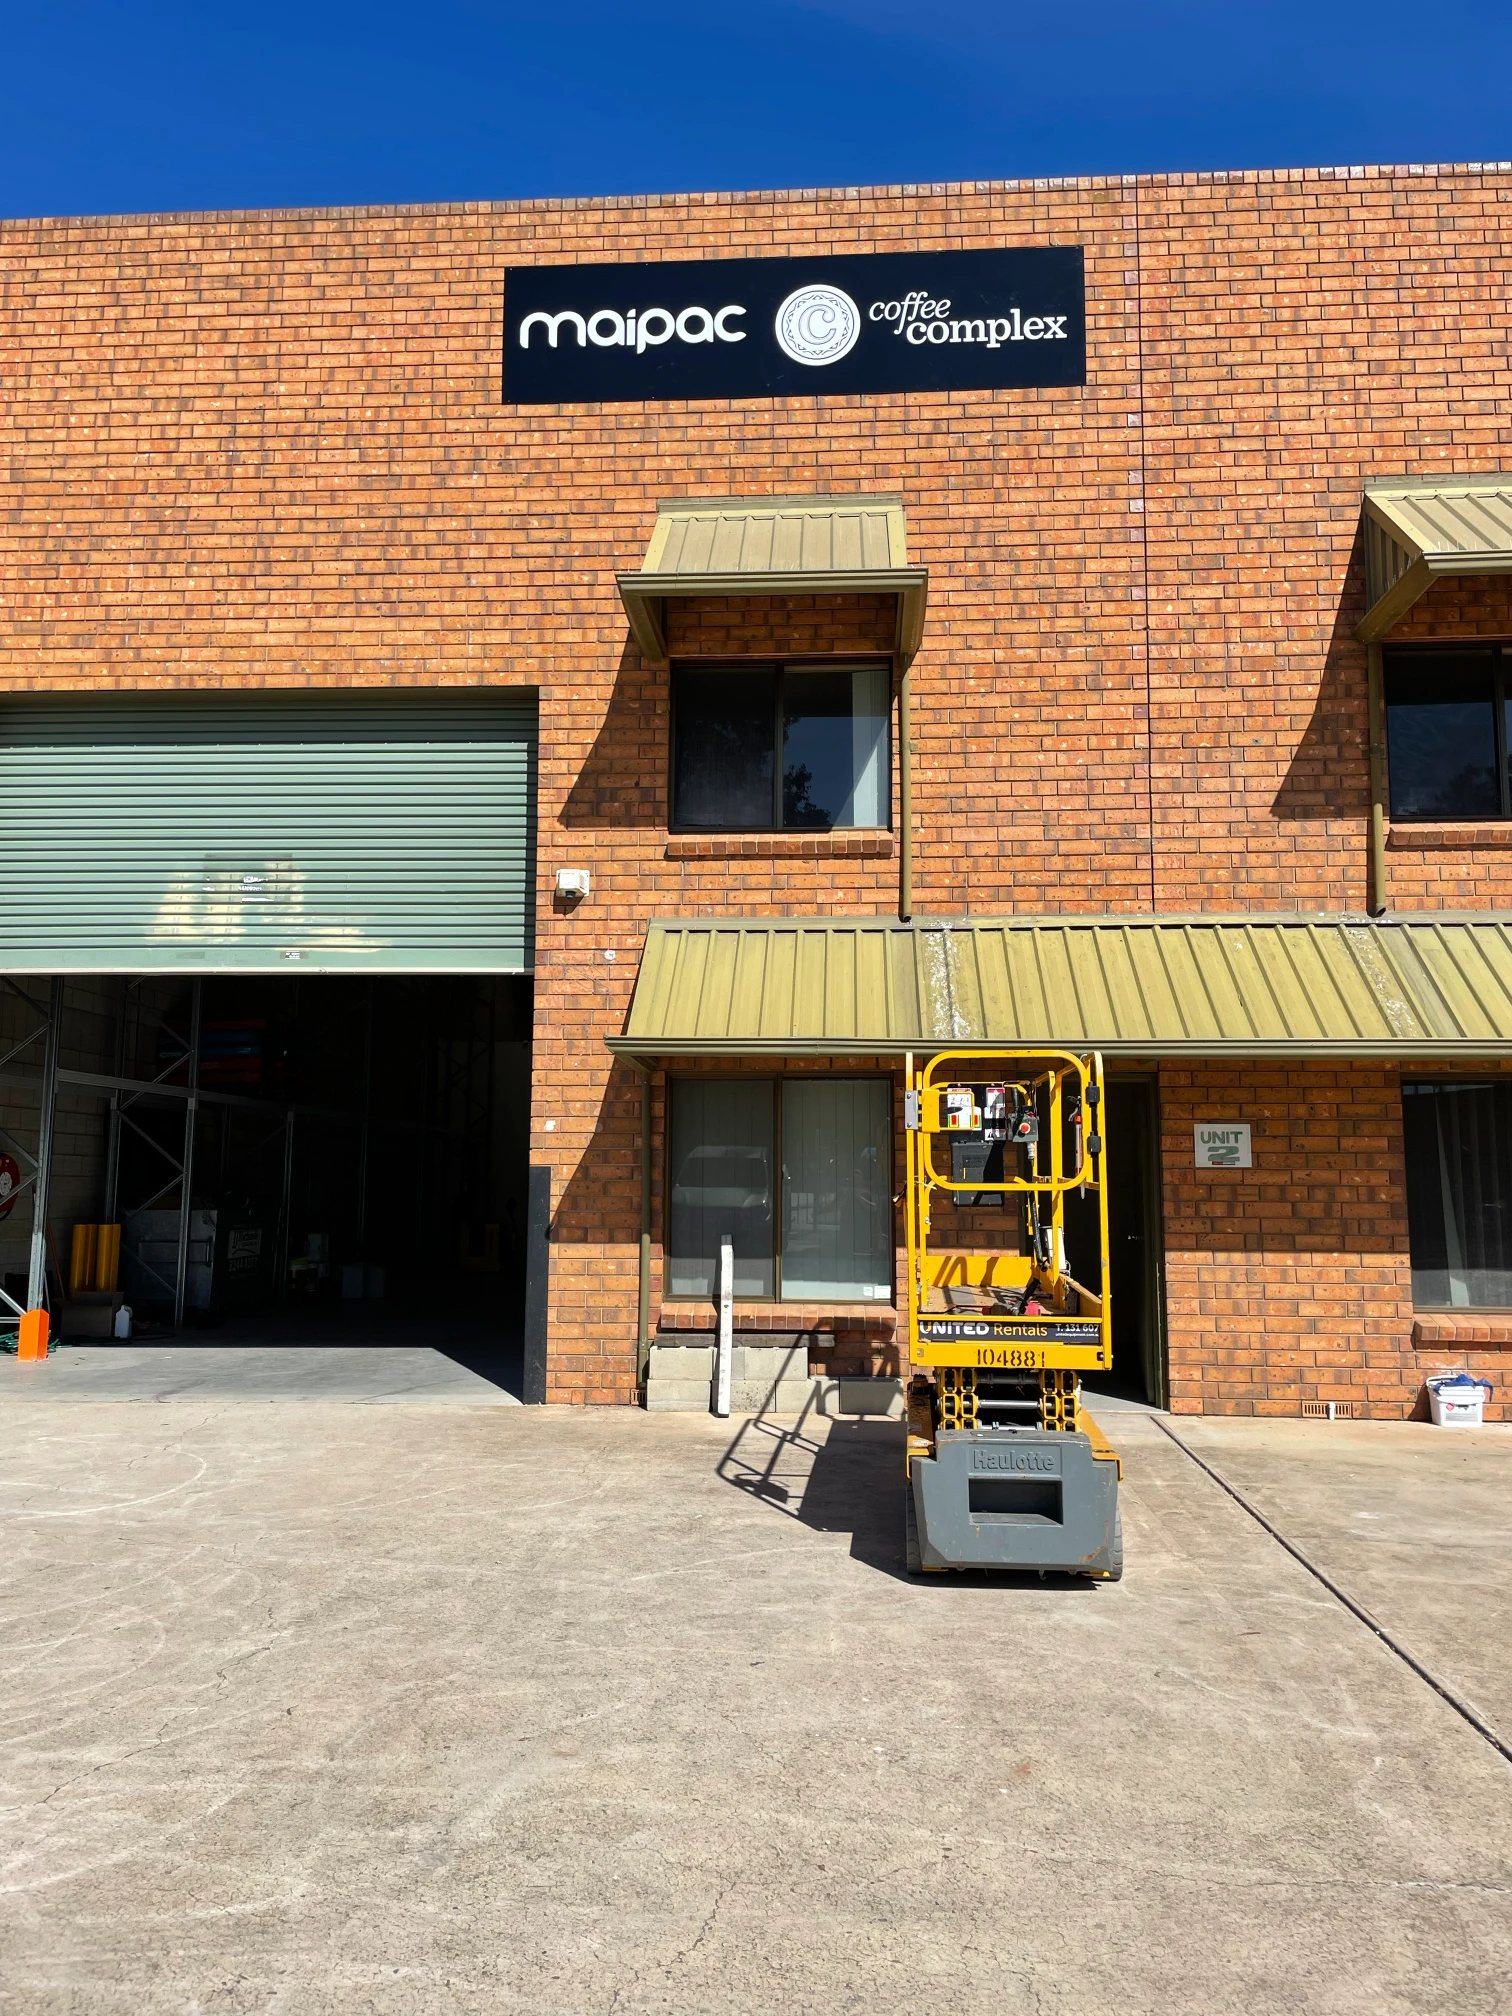 Maipac coffee pod manufacturing Warehouse in Adelaide, with a yellow scissor lift directly infront of the doorway to the warehouse